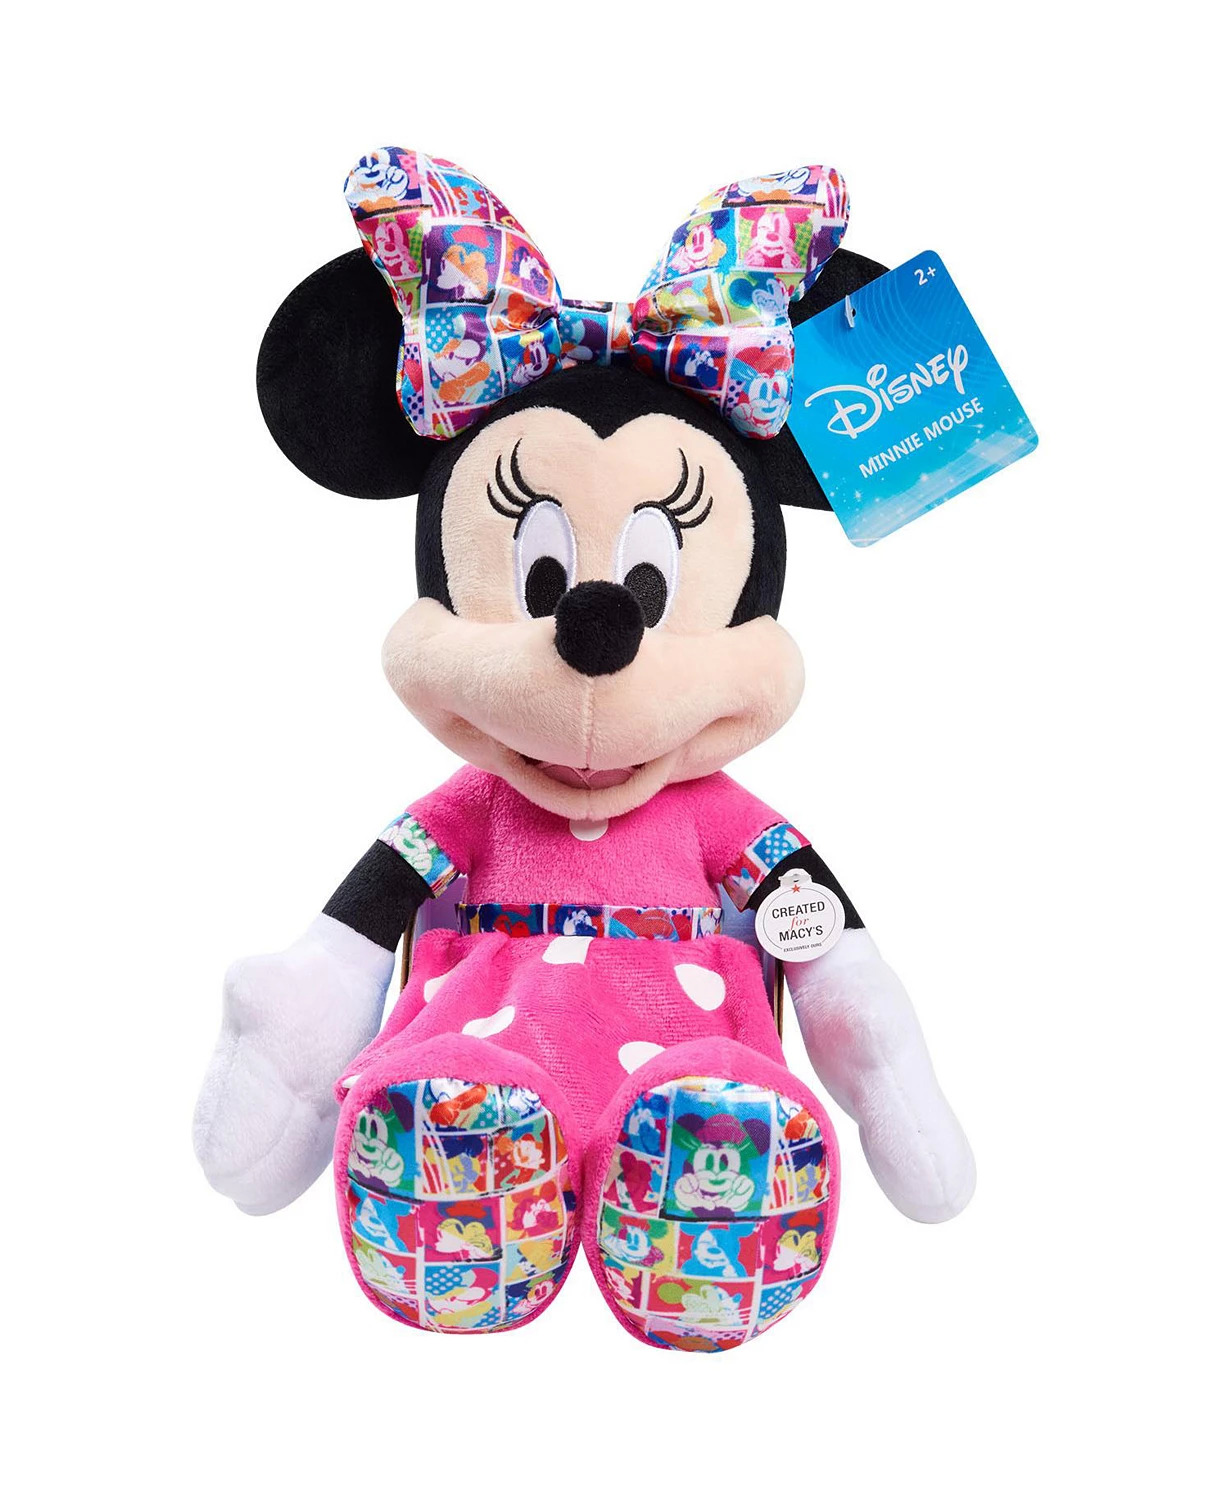 15" Disney Classics Medium Plush Friend: Minnie Mouse $10, Mickey Mouse $10 + Free Curbside Pickup at Macy's or FS on $25+